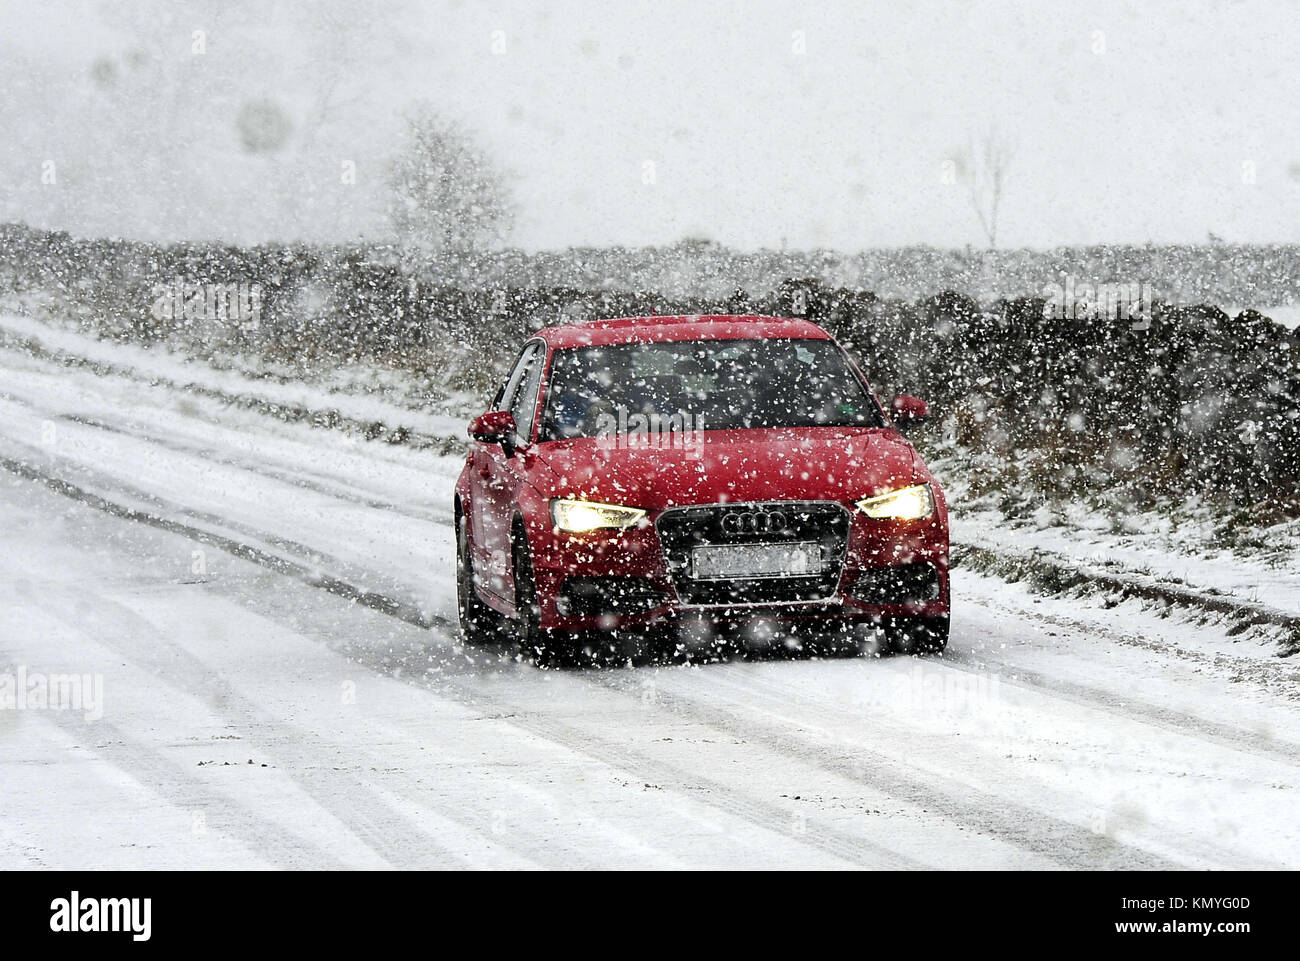 Snow falling near Castleton in the Peak District, as widespread disruption is expected as snow continues to fall across large parts of the UK, with forecasters warning some communities could be cut off as temperatures plummet. Stock Photo